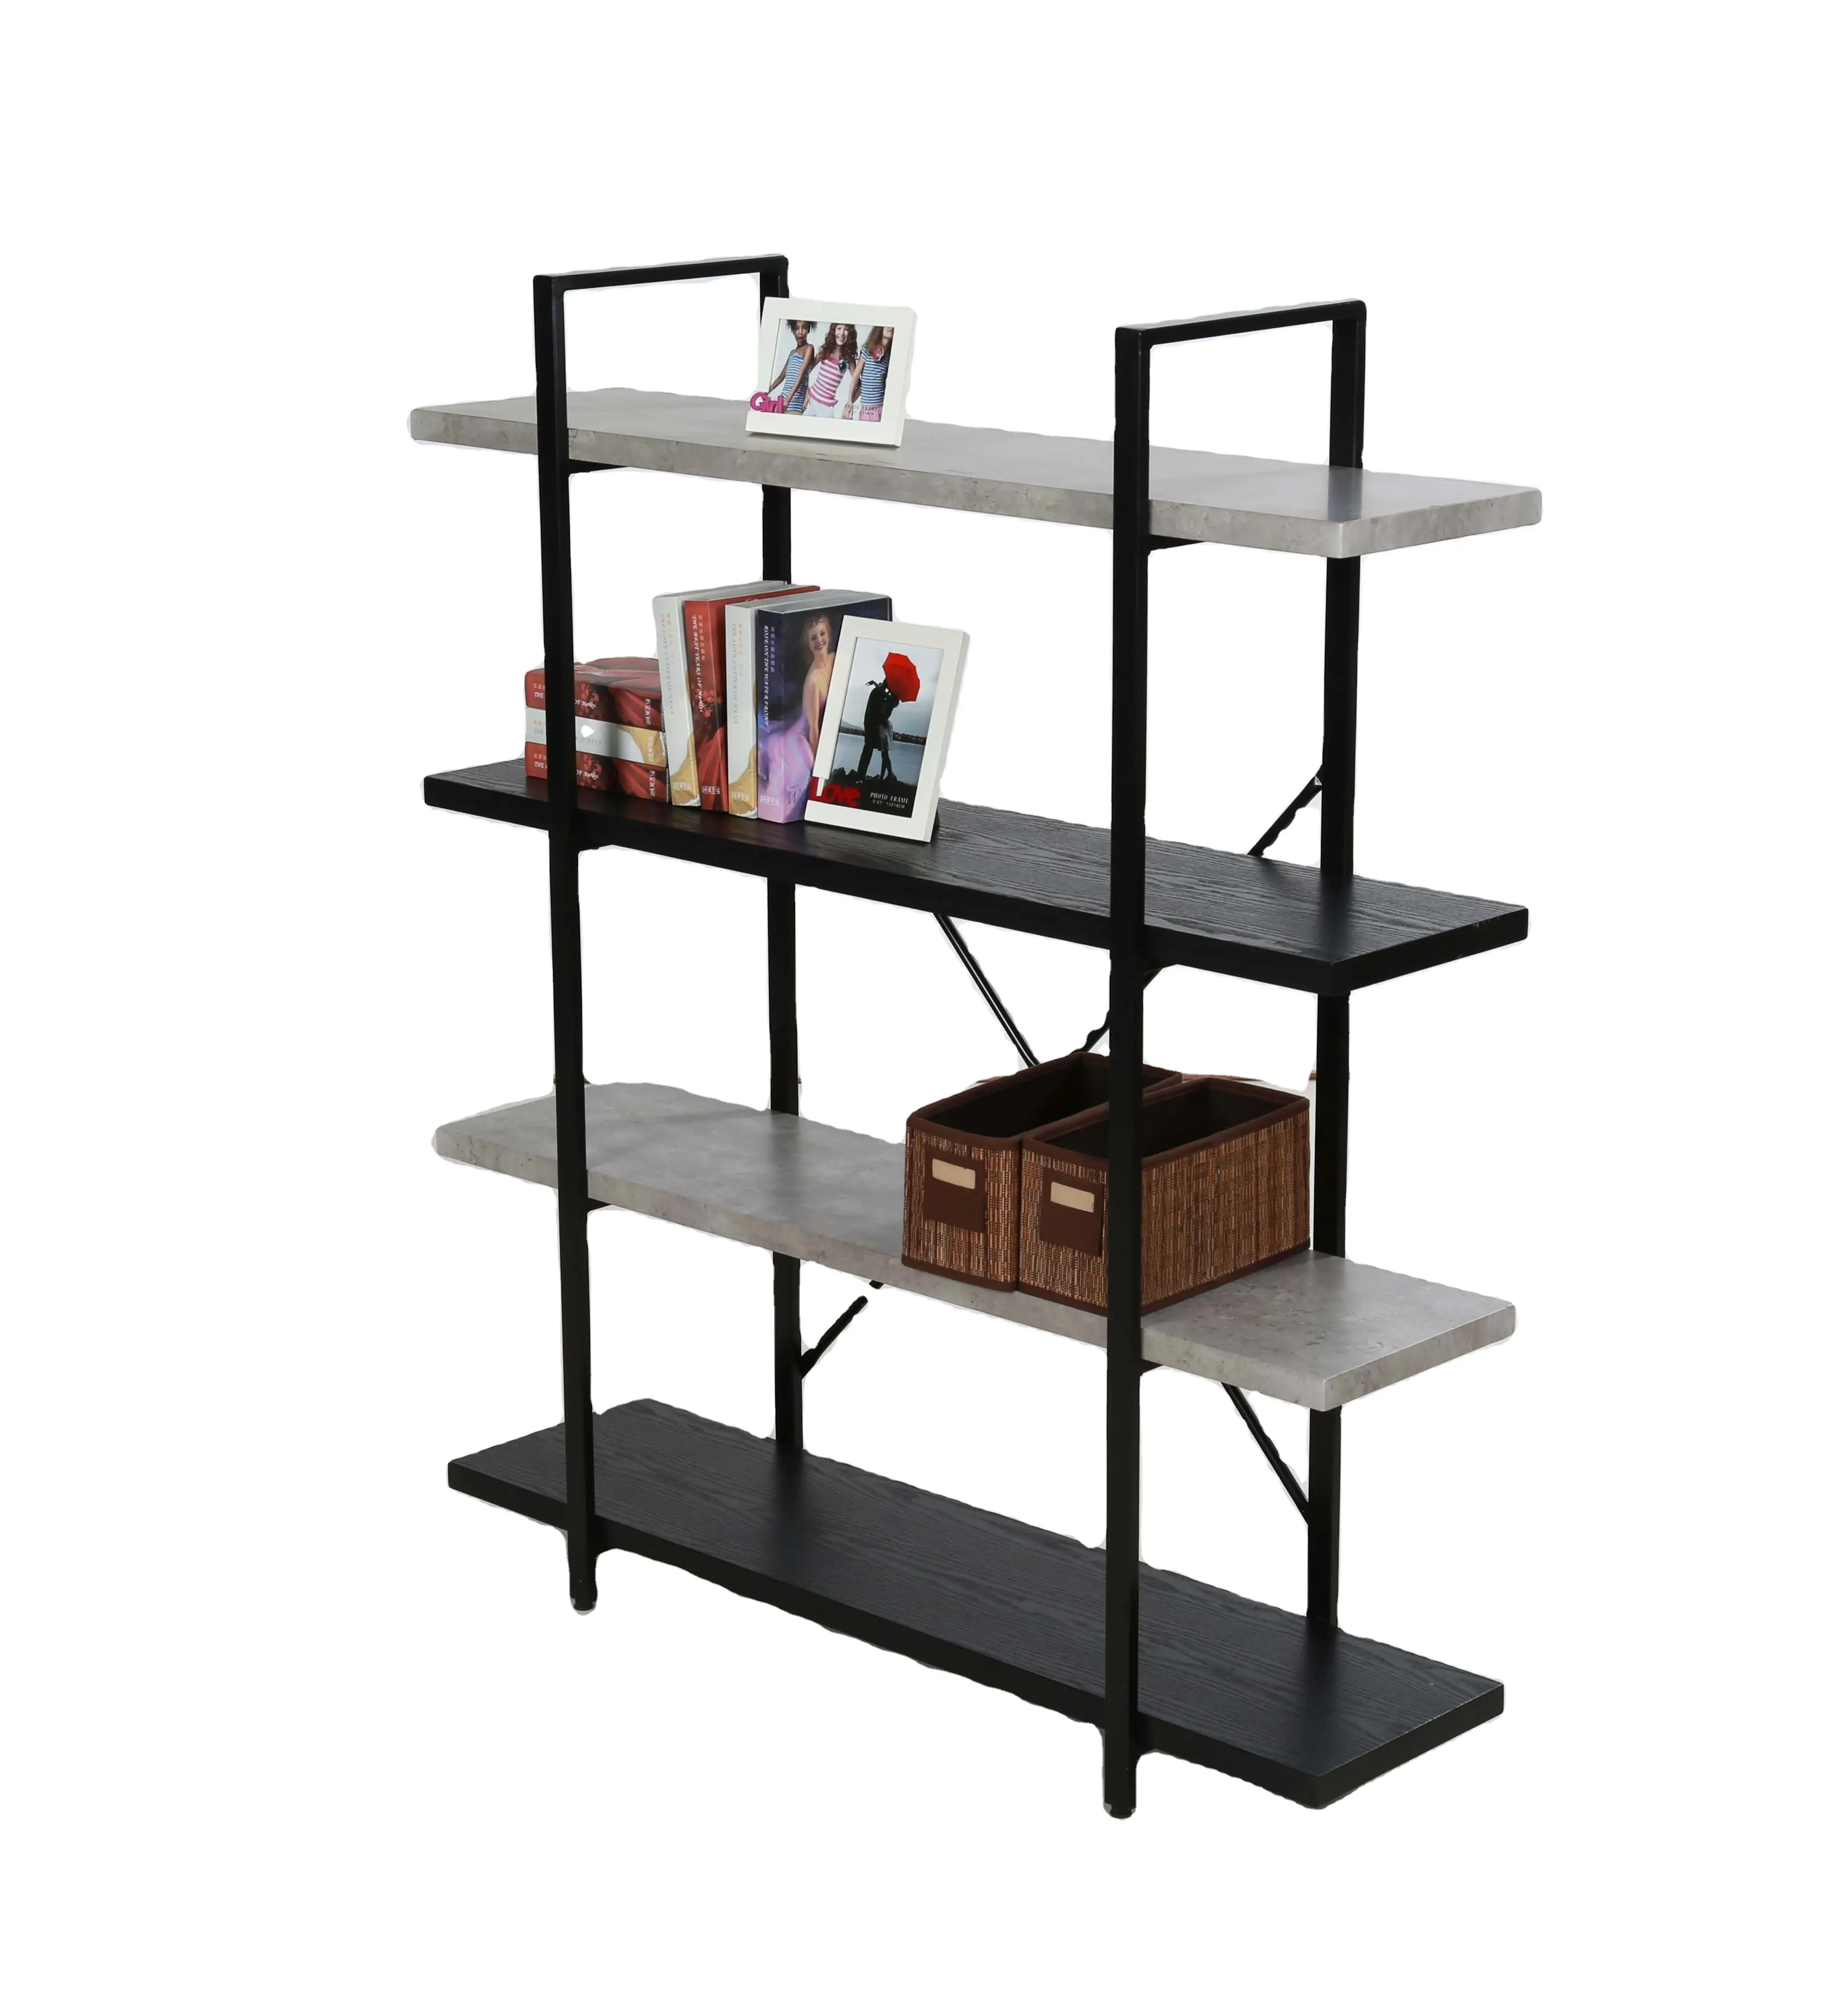 Home office furniture 4 tiers wood and metal modern simple design book shelf bookshelf bookcase wooden